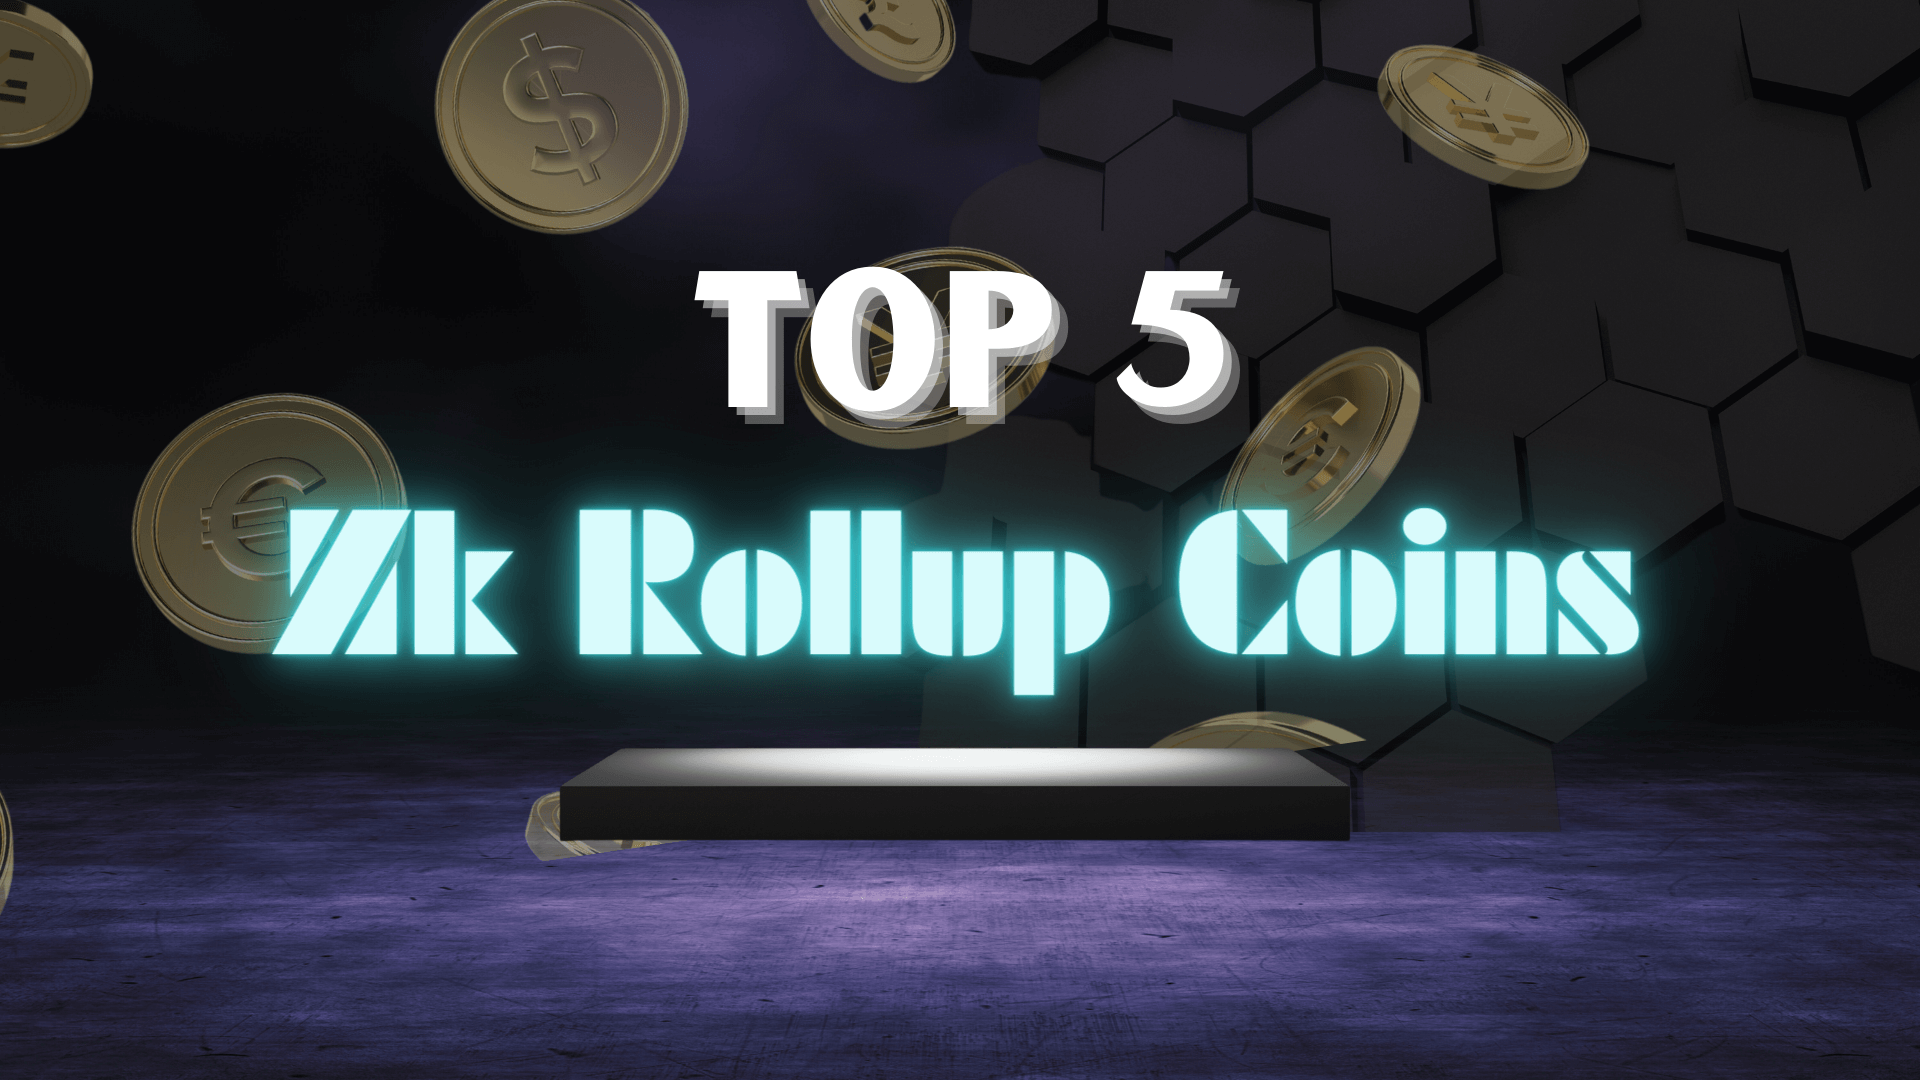 zk rollup coins - featured image